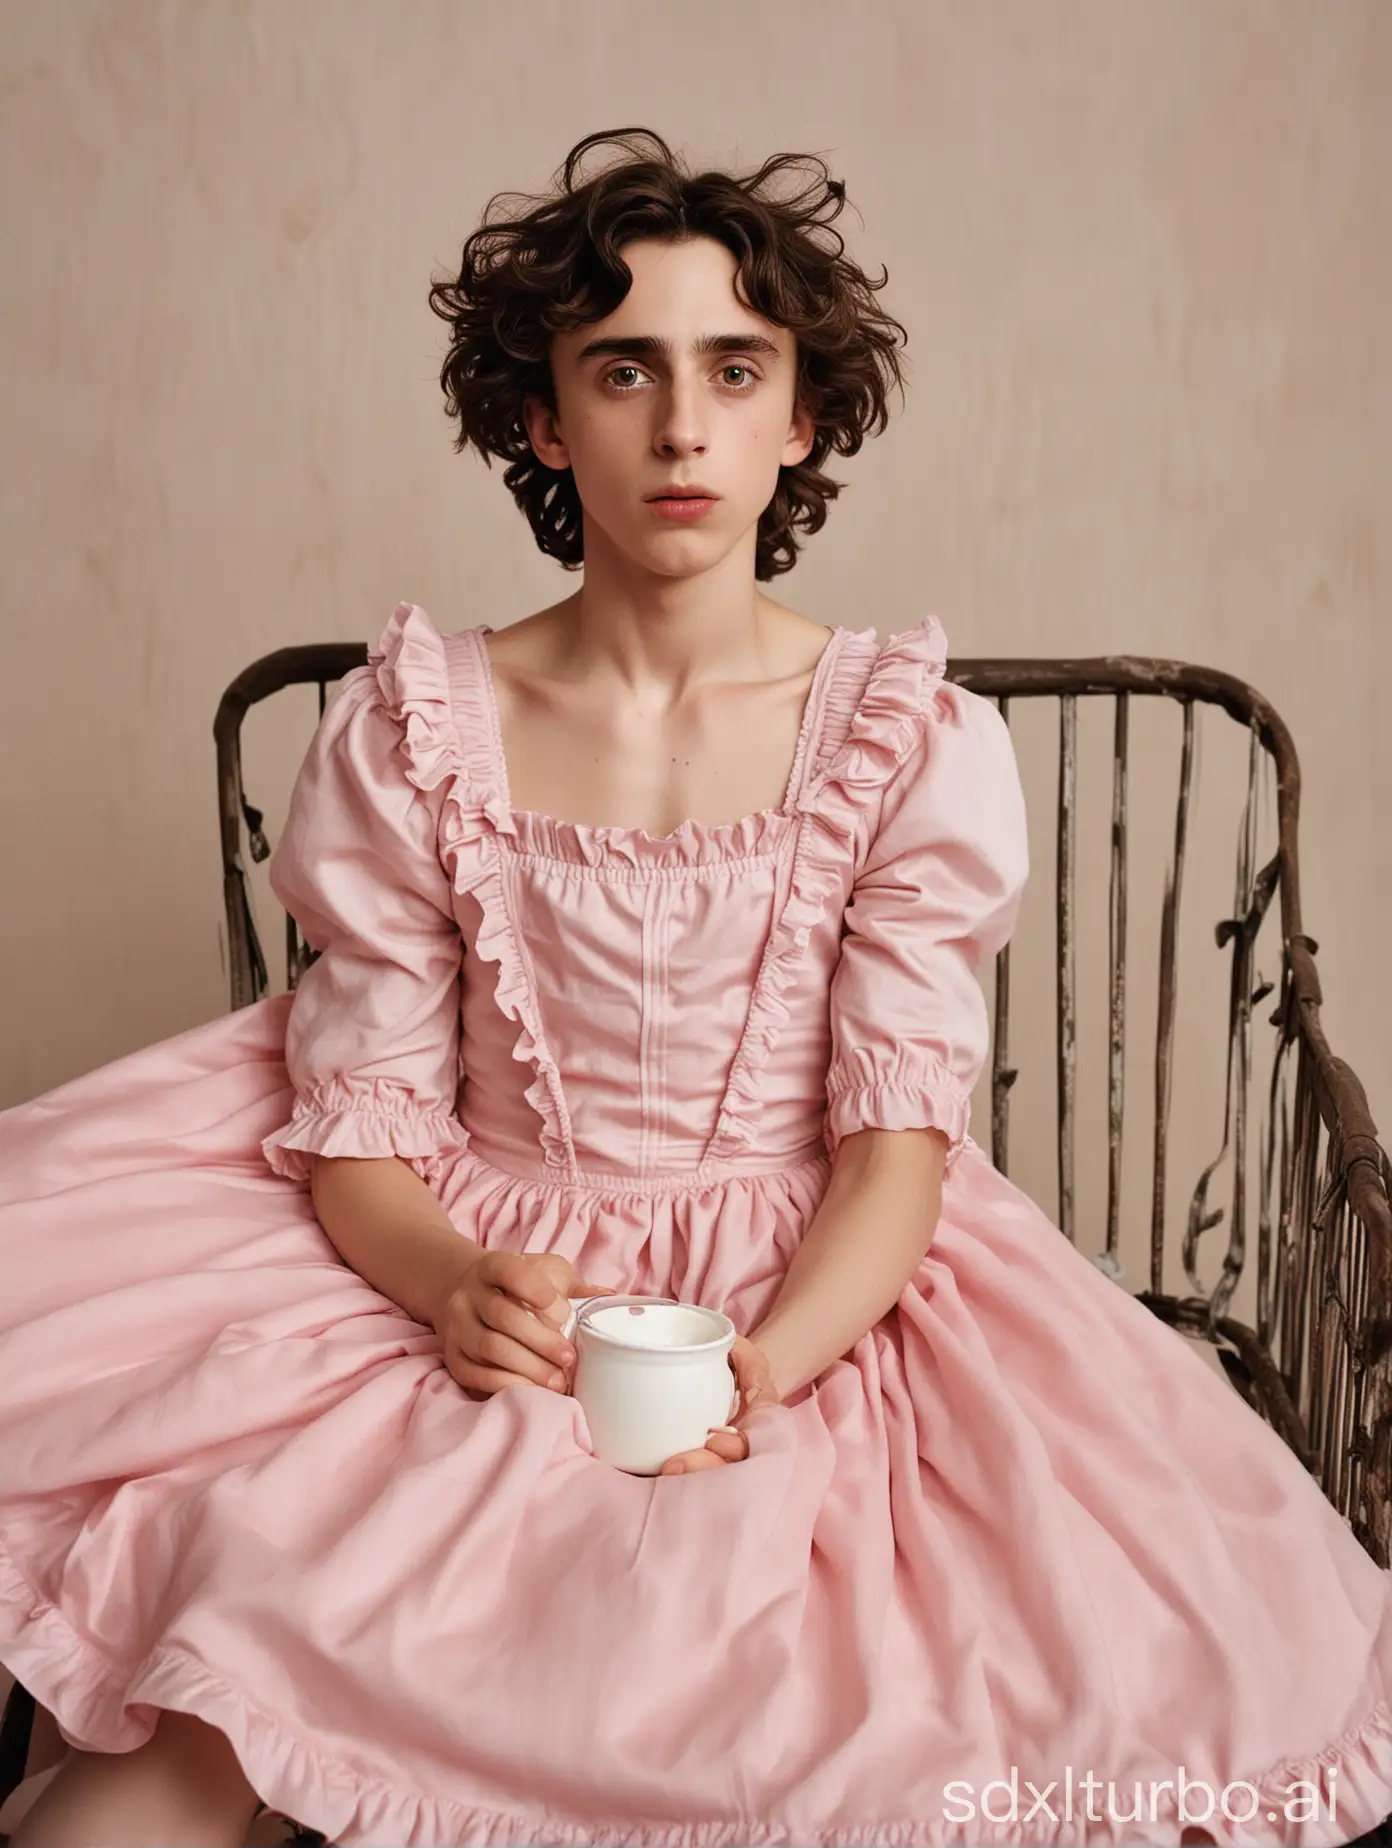 ((Gender role reversal), photograph of an unbreeched Timothée Chalamet (age 23 but acting like a brat) wearing a long pink ballet dress and a bib, sitting strapped in an oversized pram, throwing a tantrum while eating yogurt he does not like